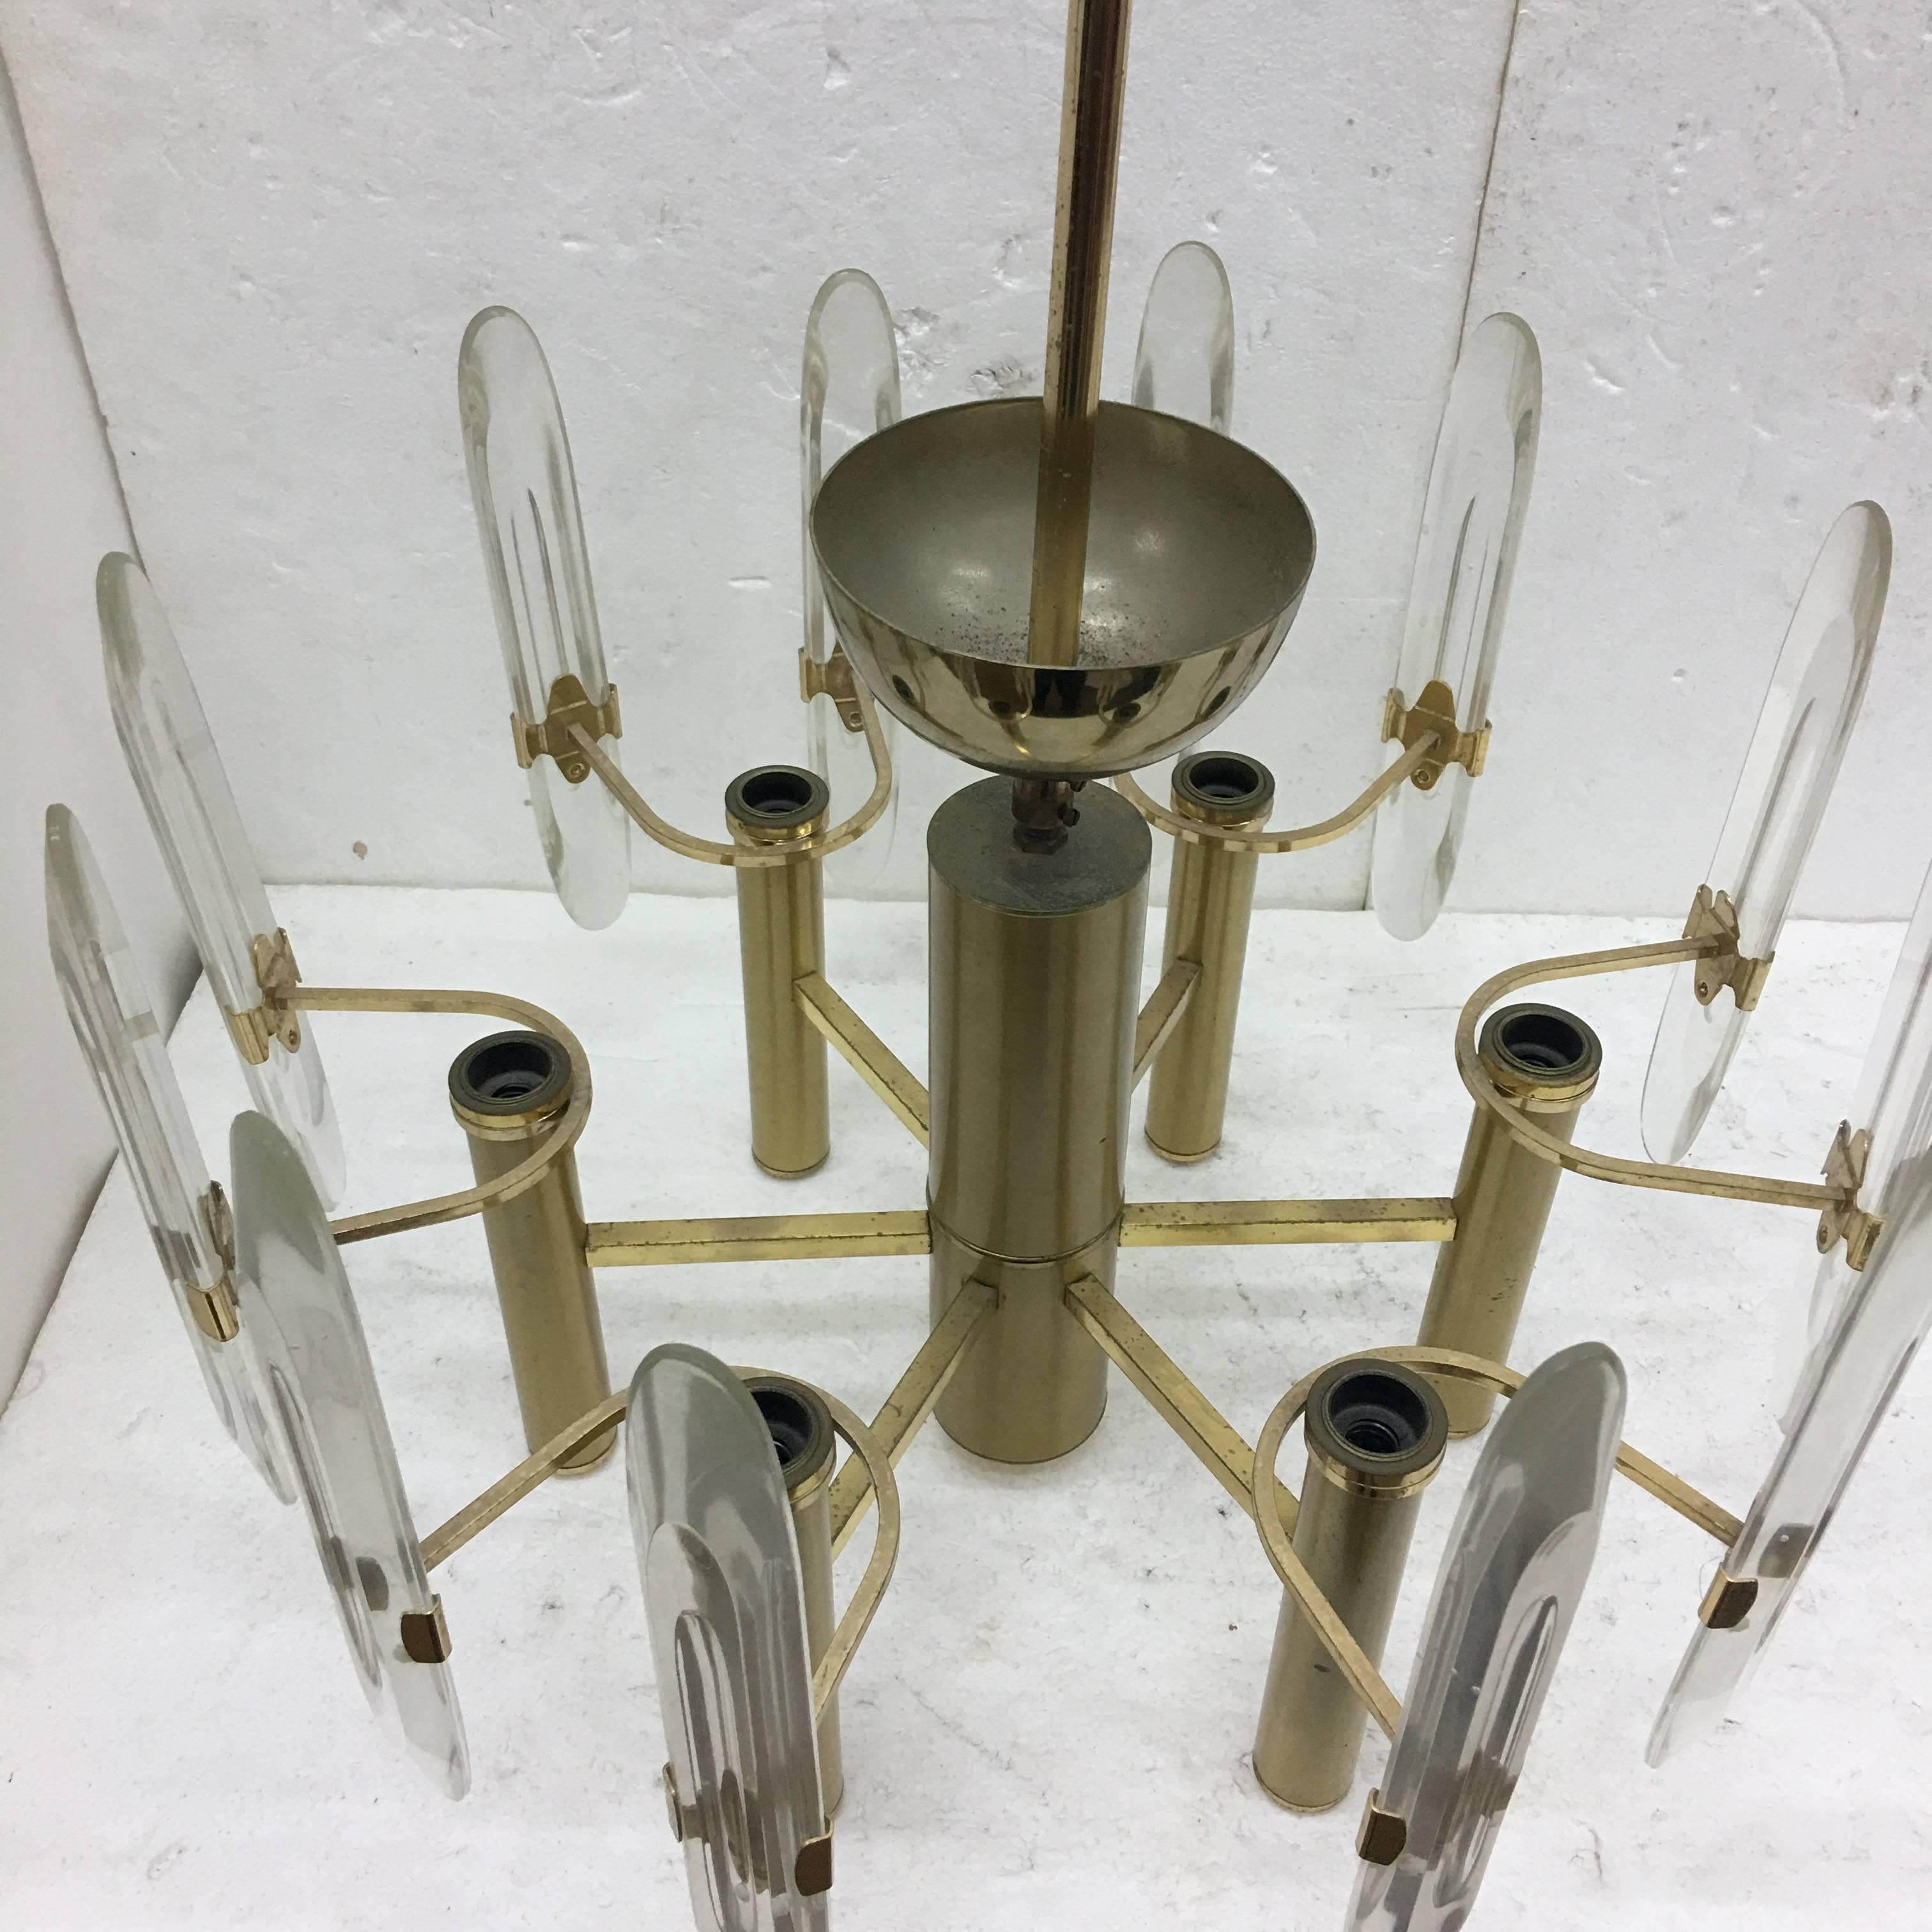 Six-lights chandelier by Gaetano Sciolari, made in Italy in circa 1960, gold metal and optical crystal glass. It works with both 110 and 220 Volts and need regular e14 bulbs.